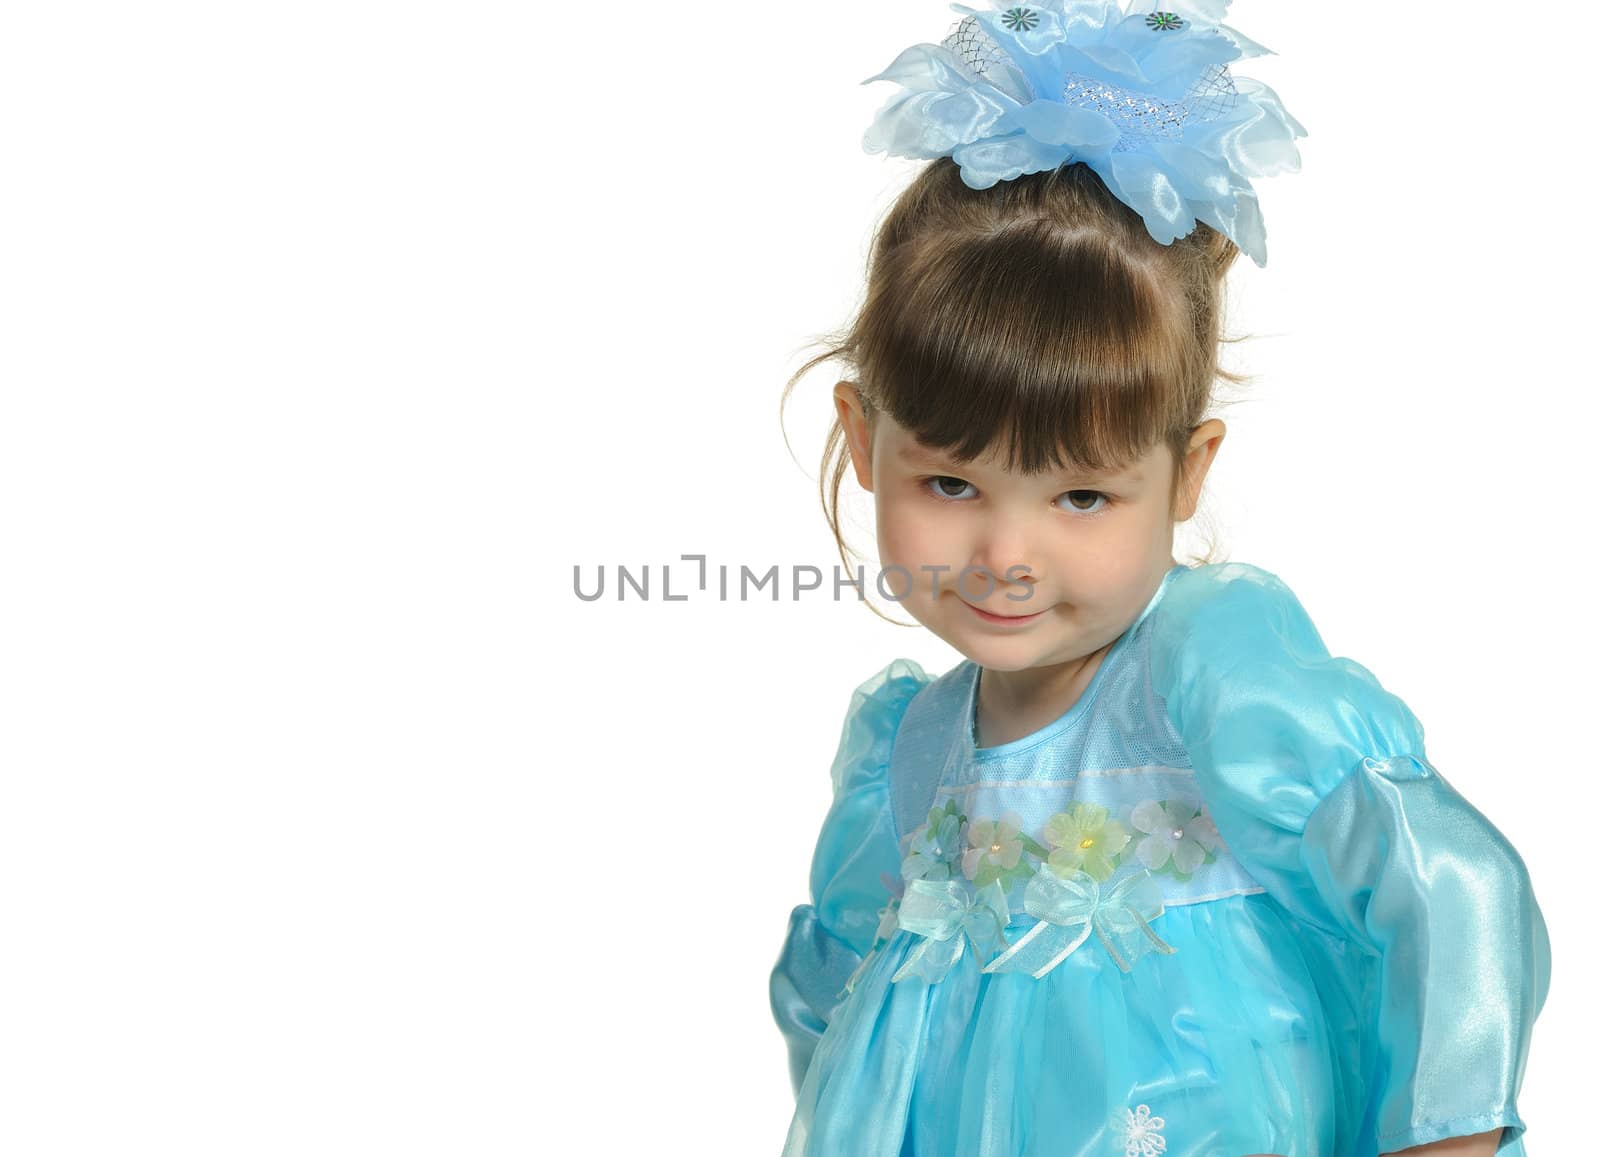 Pretty the little girl in a blue dress. It is isolated on a white background